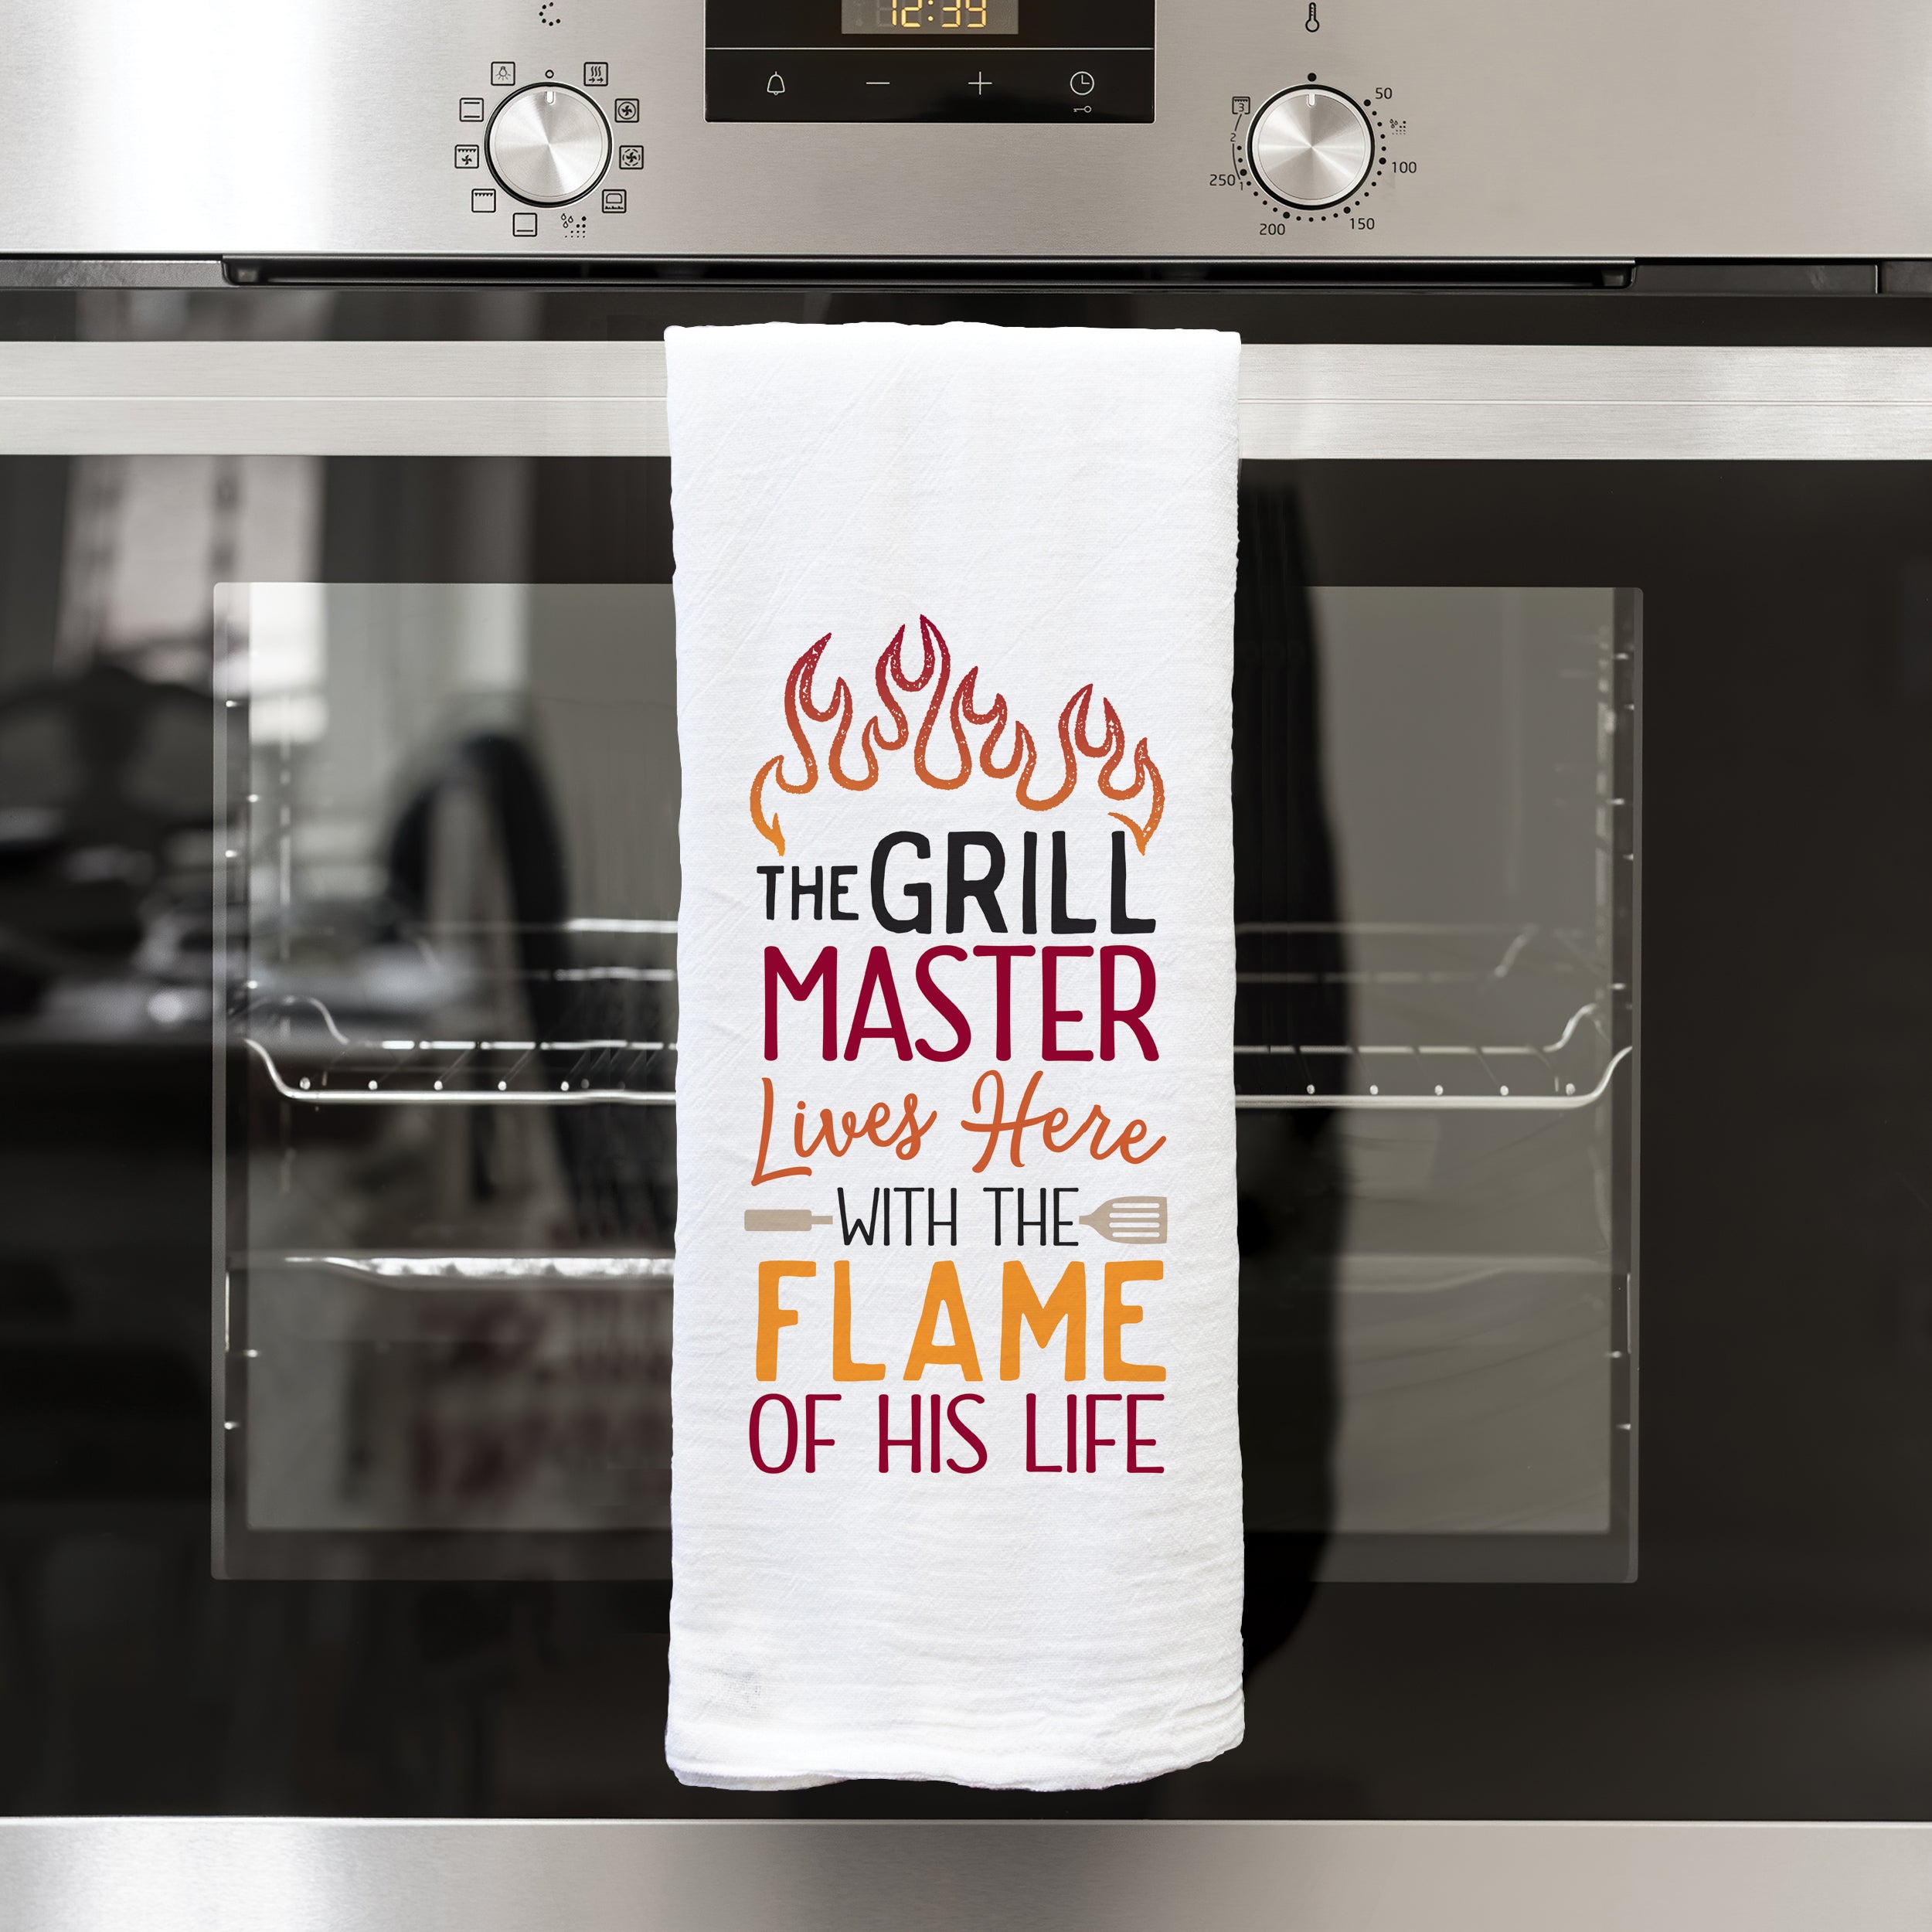 The Grill Master Lives Here With The Flame Of His Life Tea Towel